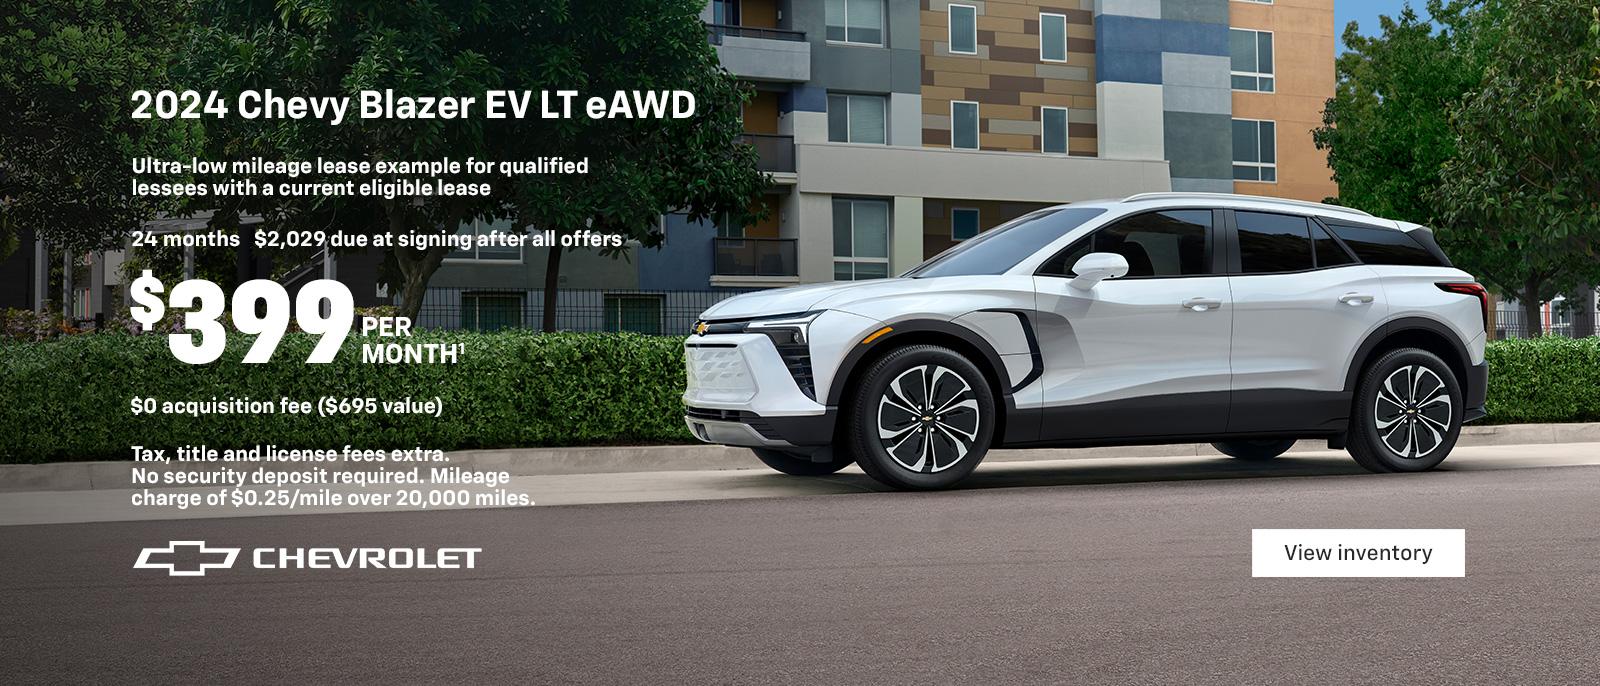 2024 Chevy Blazer EV LT eAWD. 2024 MotorTend SUV of the Year. The first-ever, all-electric Blazer EV. Ultra-low mileage lease example for qualified lessees with a current eligible lease. $399 per month. 24 months. $2,029 due at signing after all offers. $0 Acquisition fees ($695 value). Tax, title and license fees extra. No security deposit required. Mileage charge of $0.25/mile over 20,000 miles.